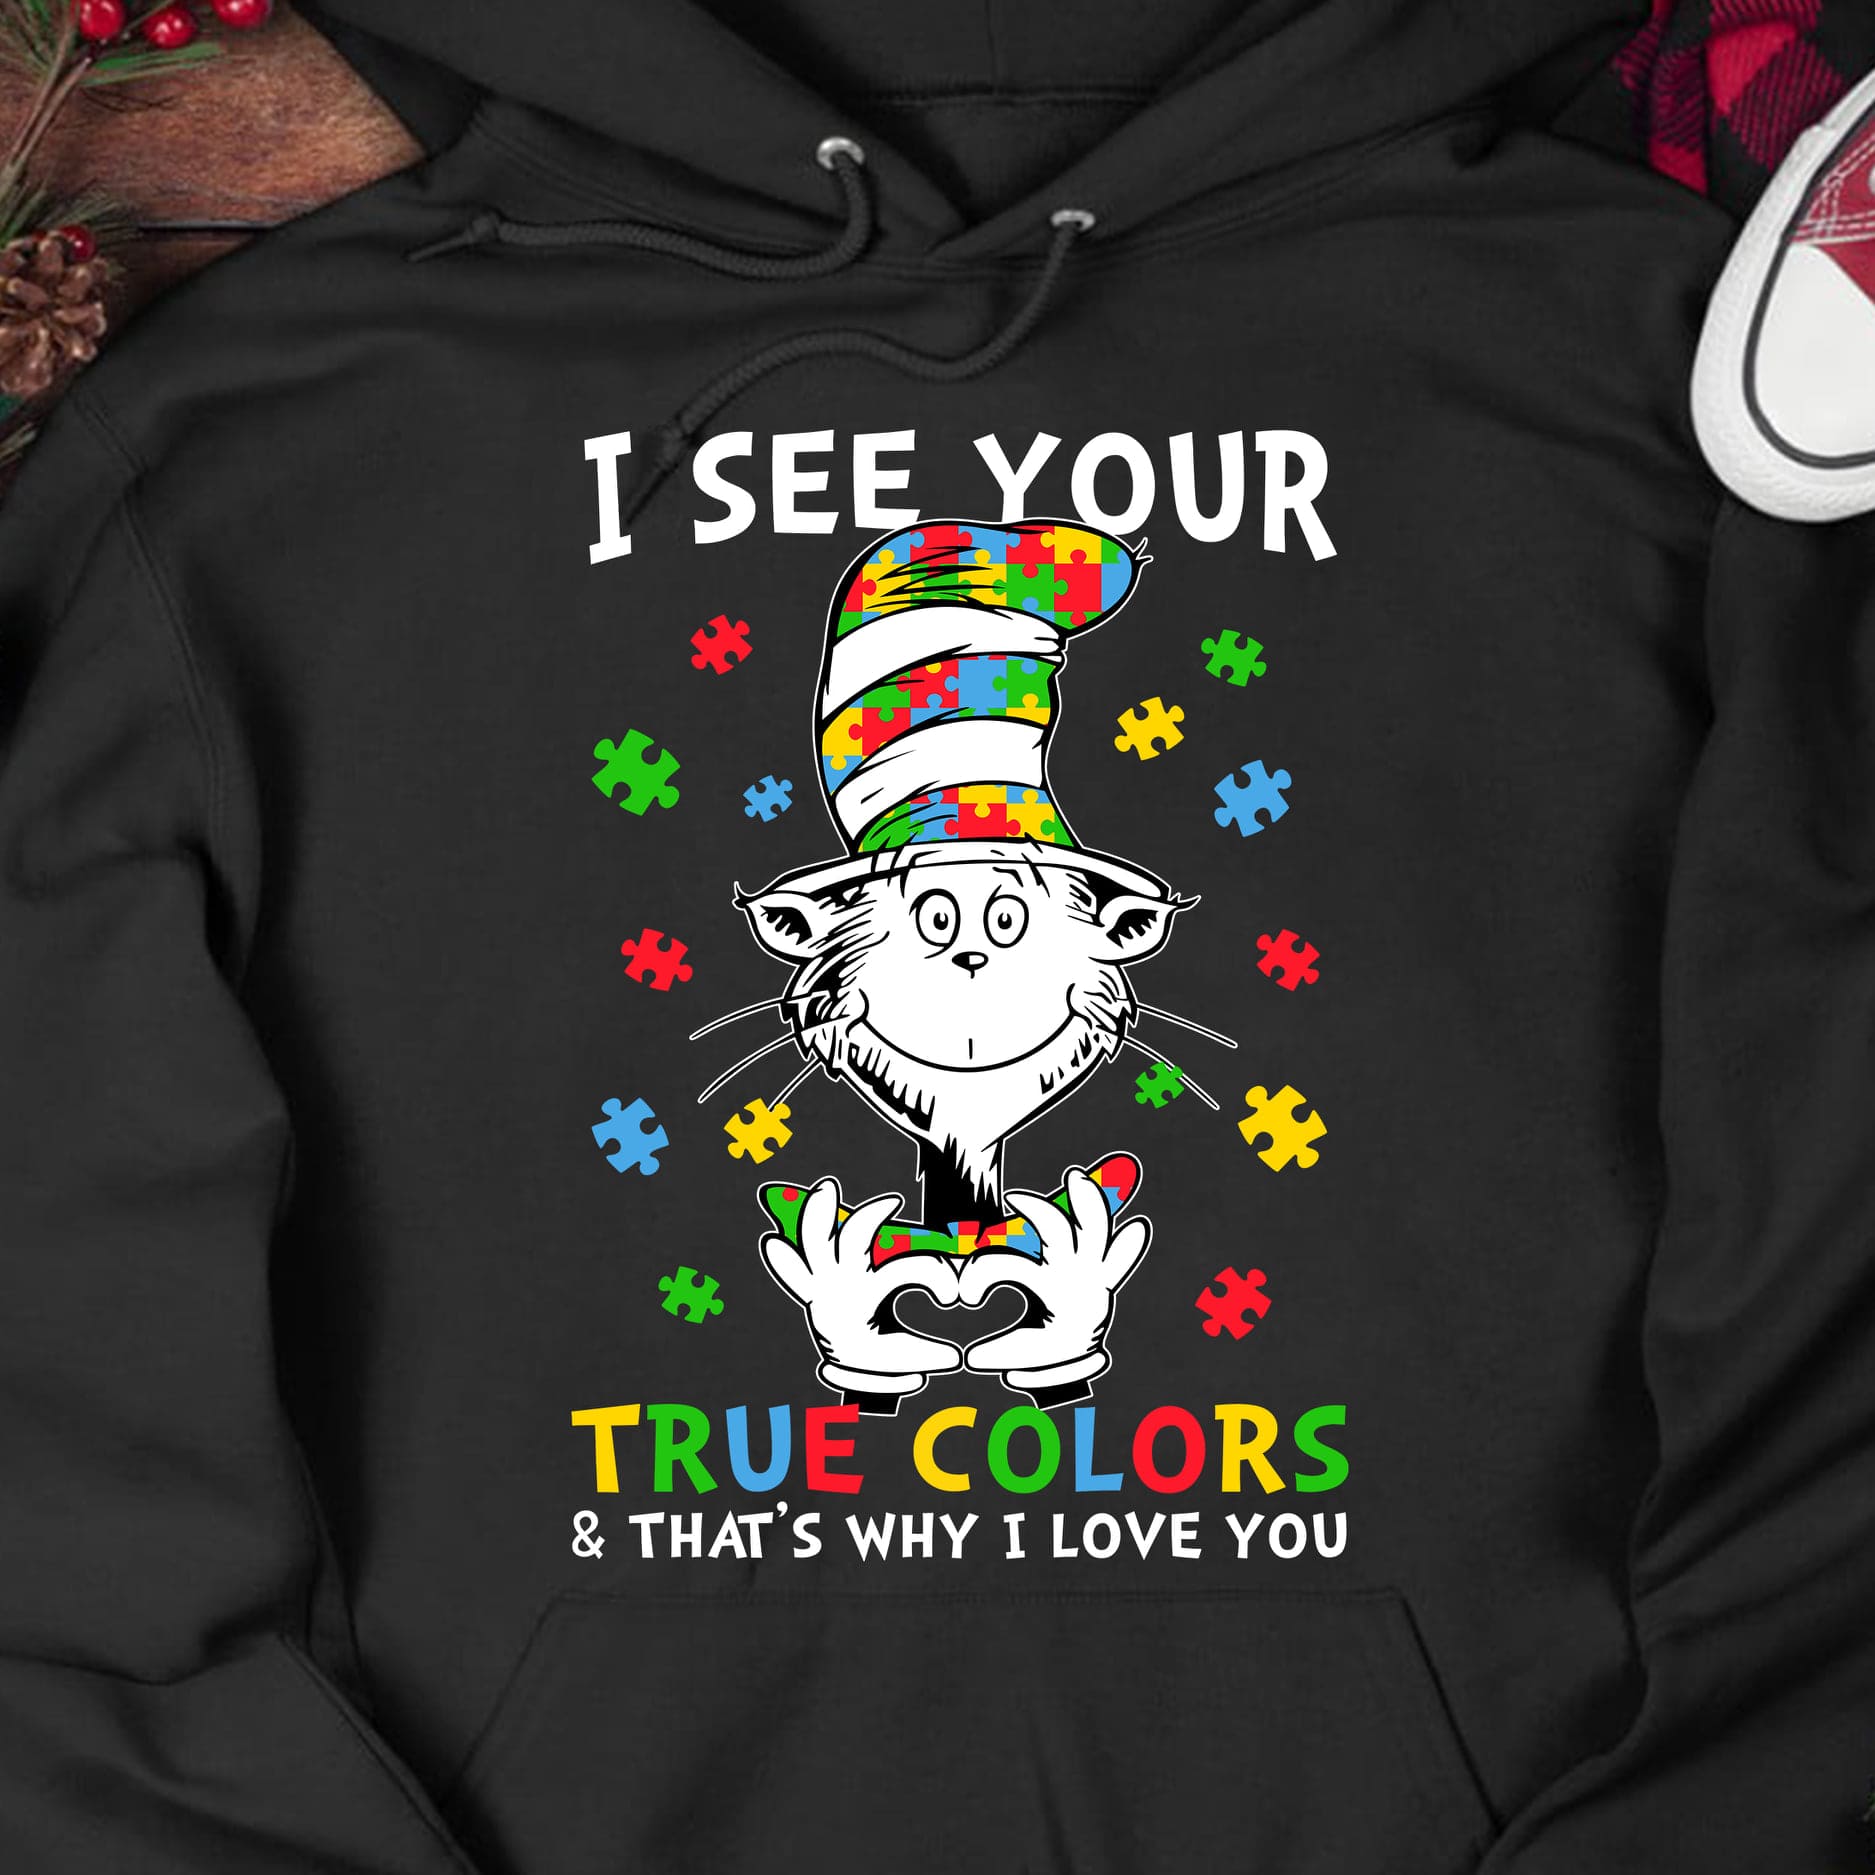 Autism Awareness - I see your true colors and that's why i love you